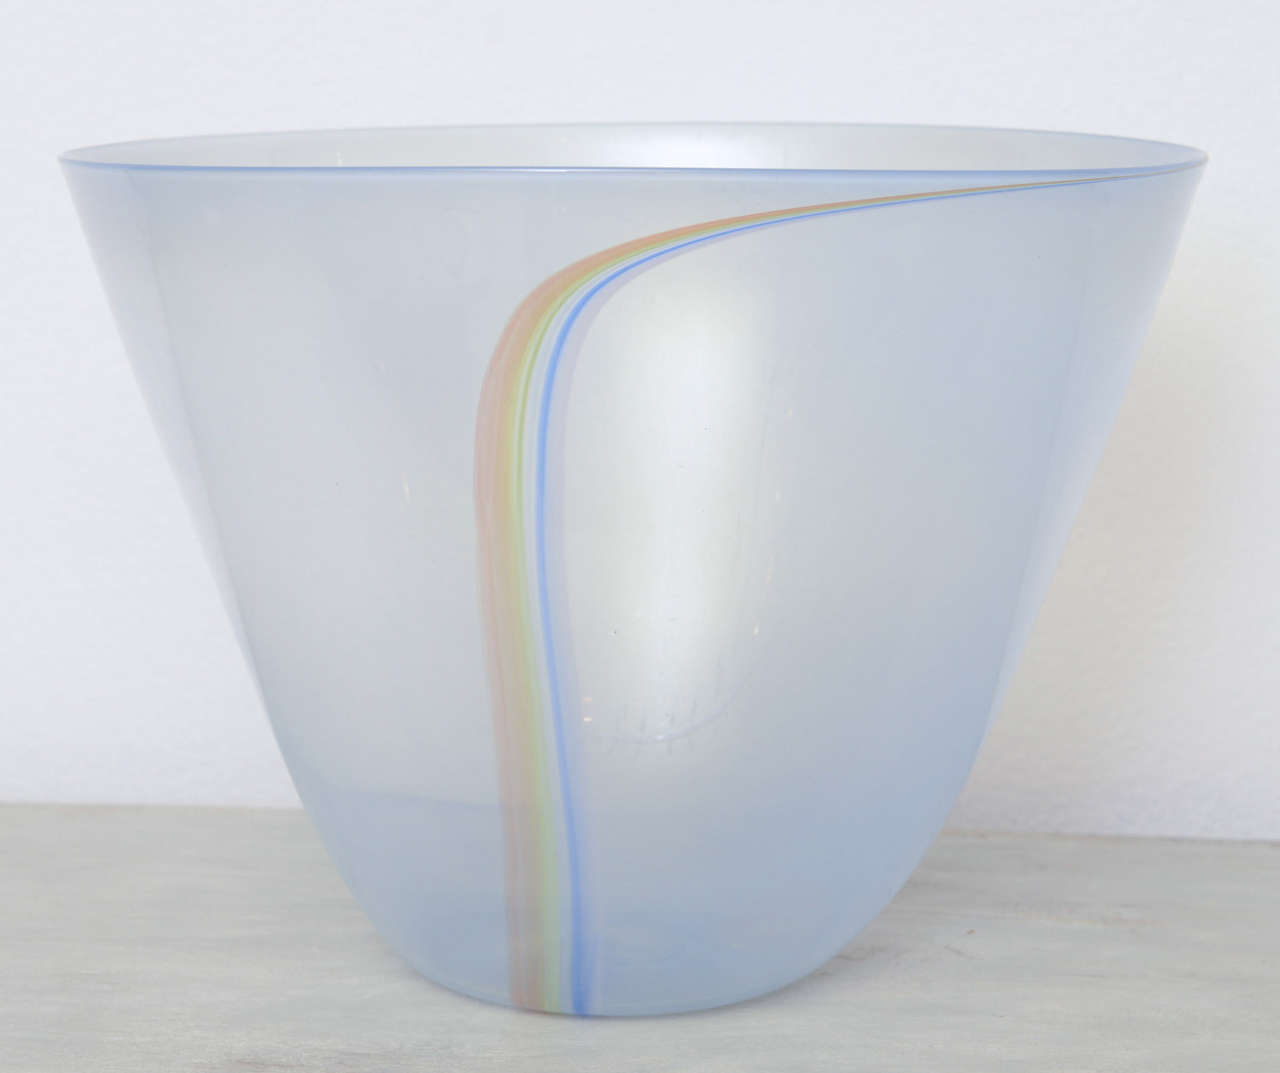 Important contemporary glass bowl signed by artist Darryle Hinz. Light blue opaline glass bowl with a striped pattern in blue, orange, yellow and white. The artist was born in California in 1949 and currently lives in Copenhagen. His work is shown